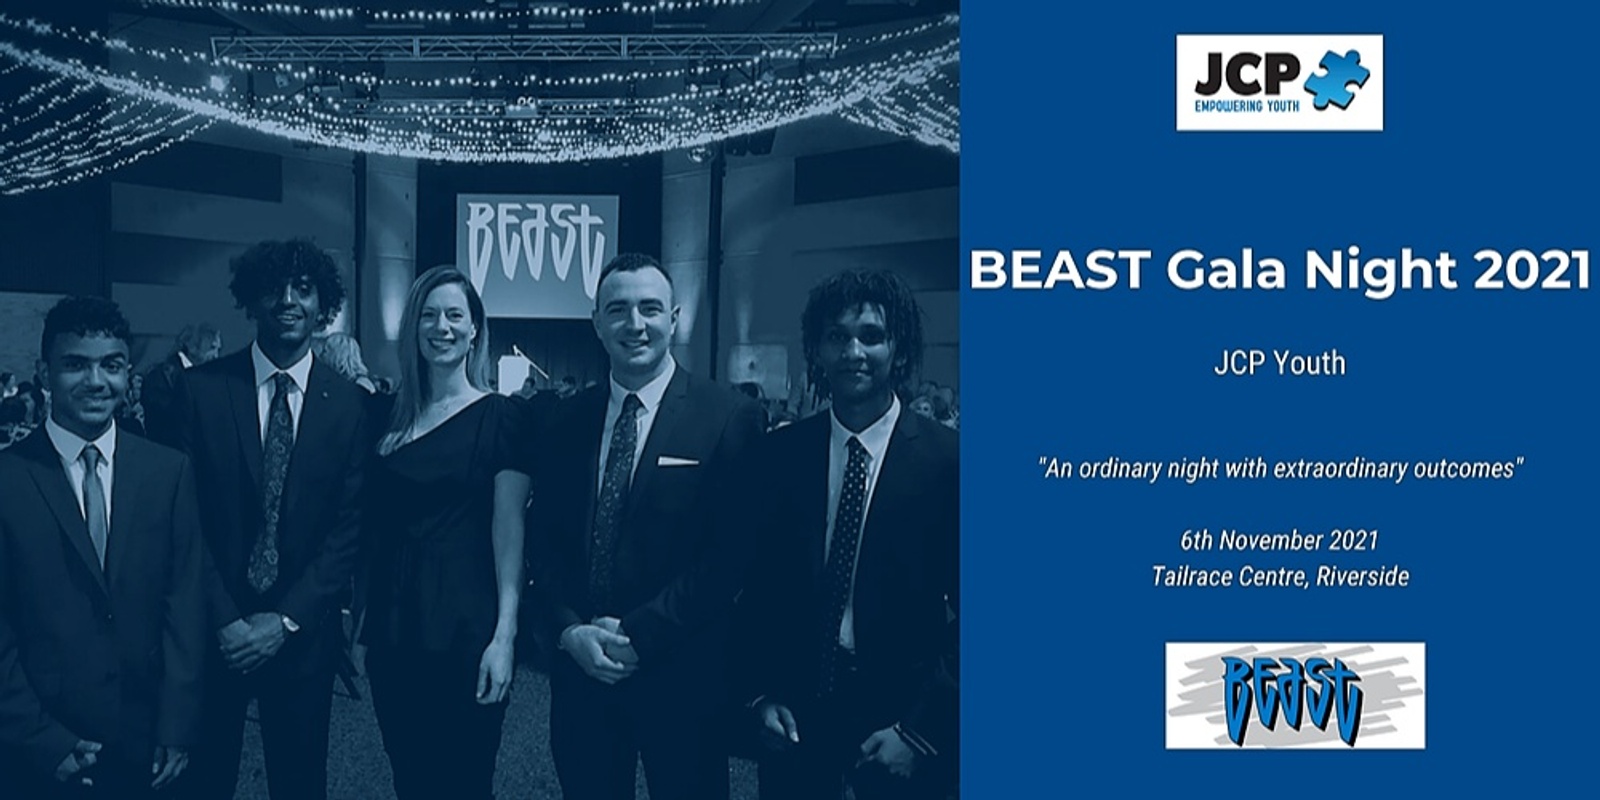 Banner image for BEAST Gala Night - JCP Youth 2021